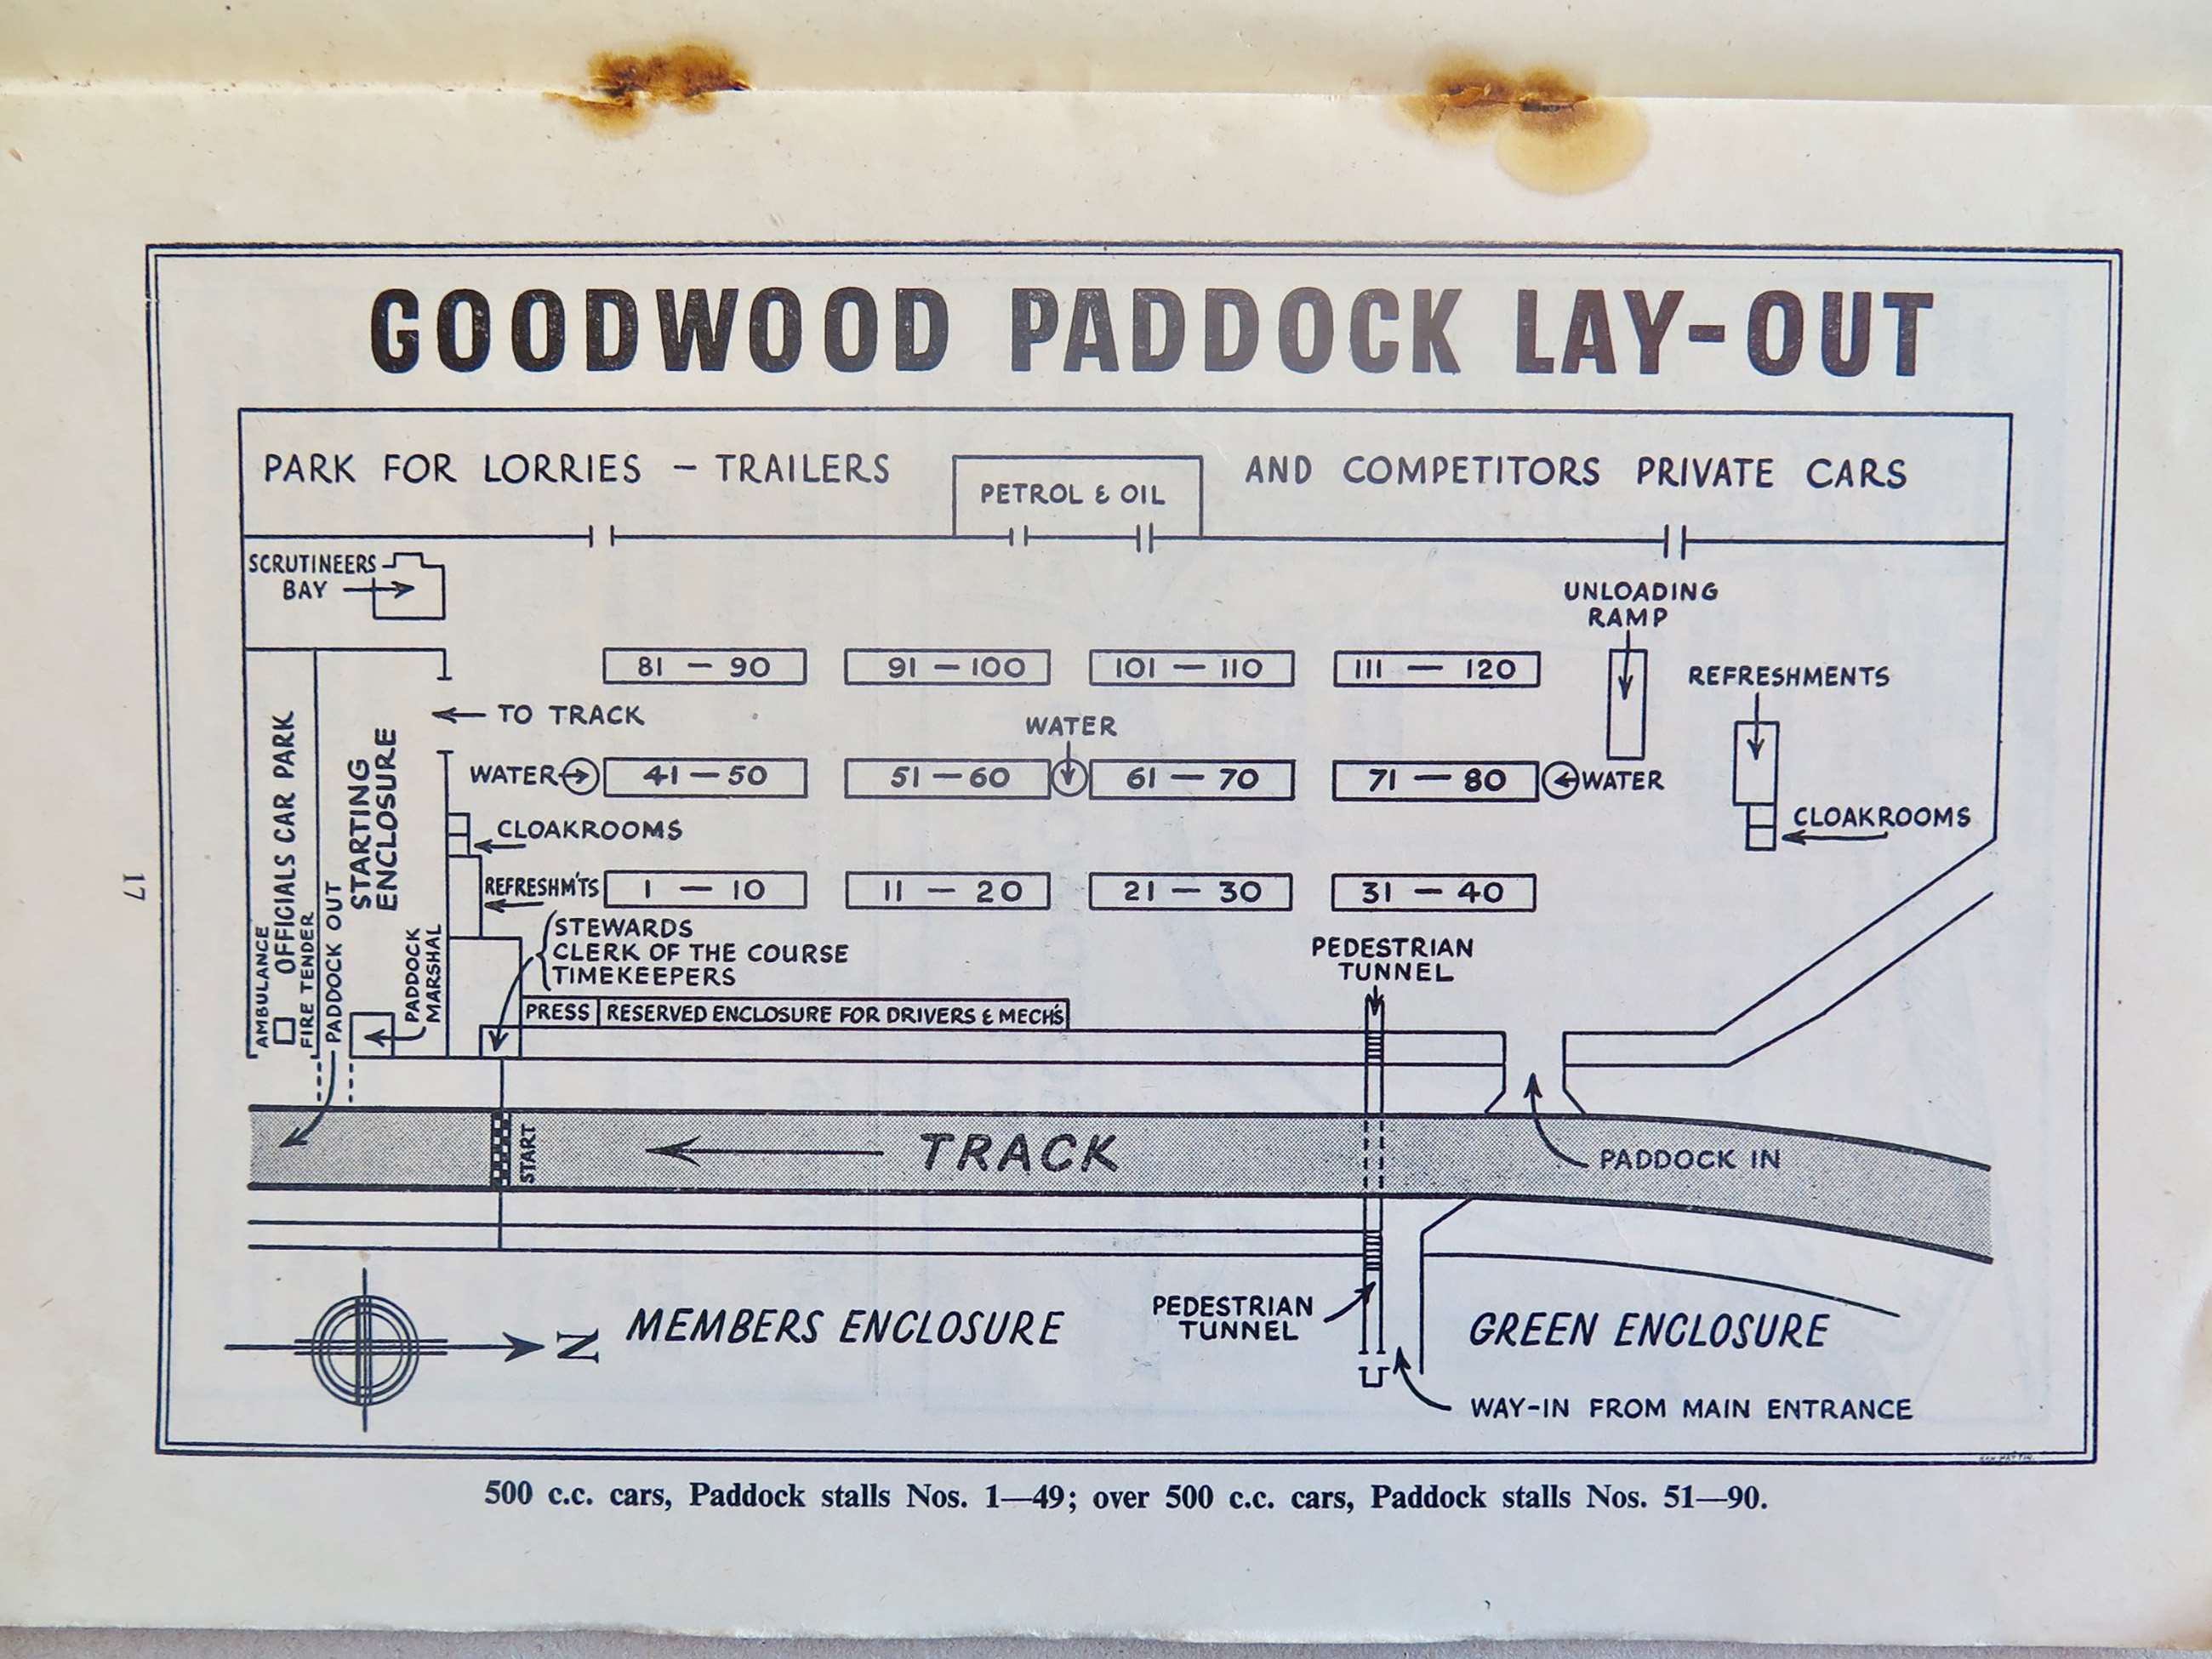 Paddock layout as on Whit-Saturday, May 27, 1950 - the 500cc cars were placed in shelters 1-49 - over 500cc entries for the other races in stalls 51-90…